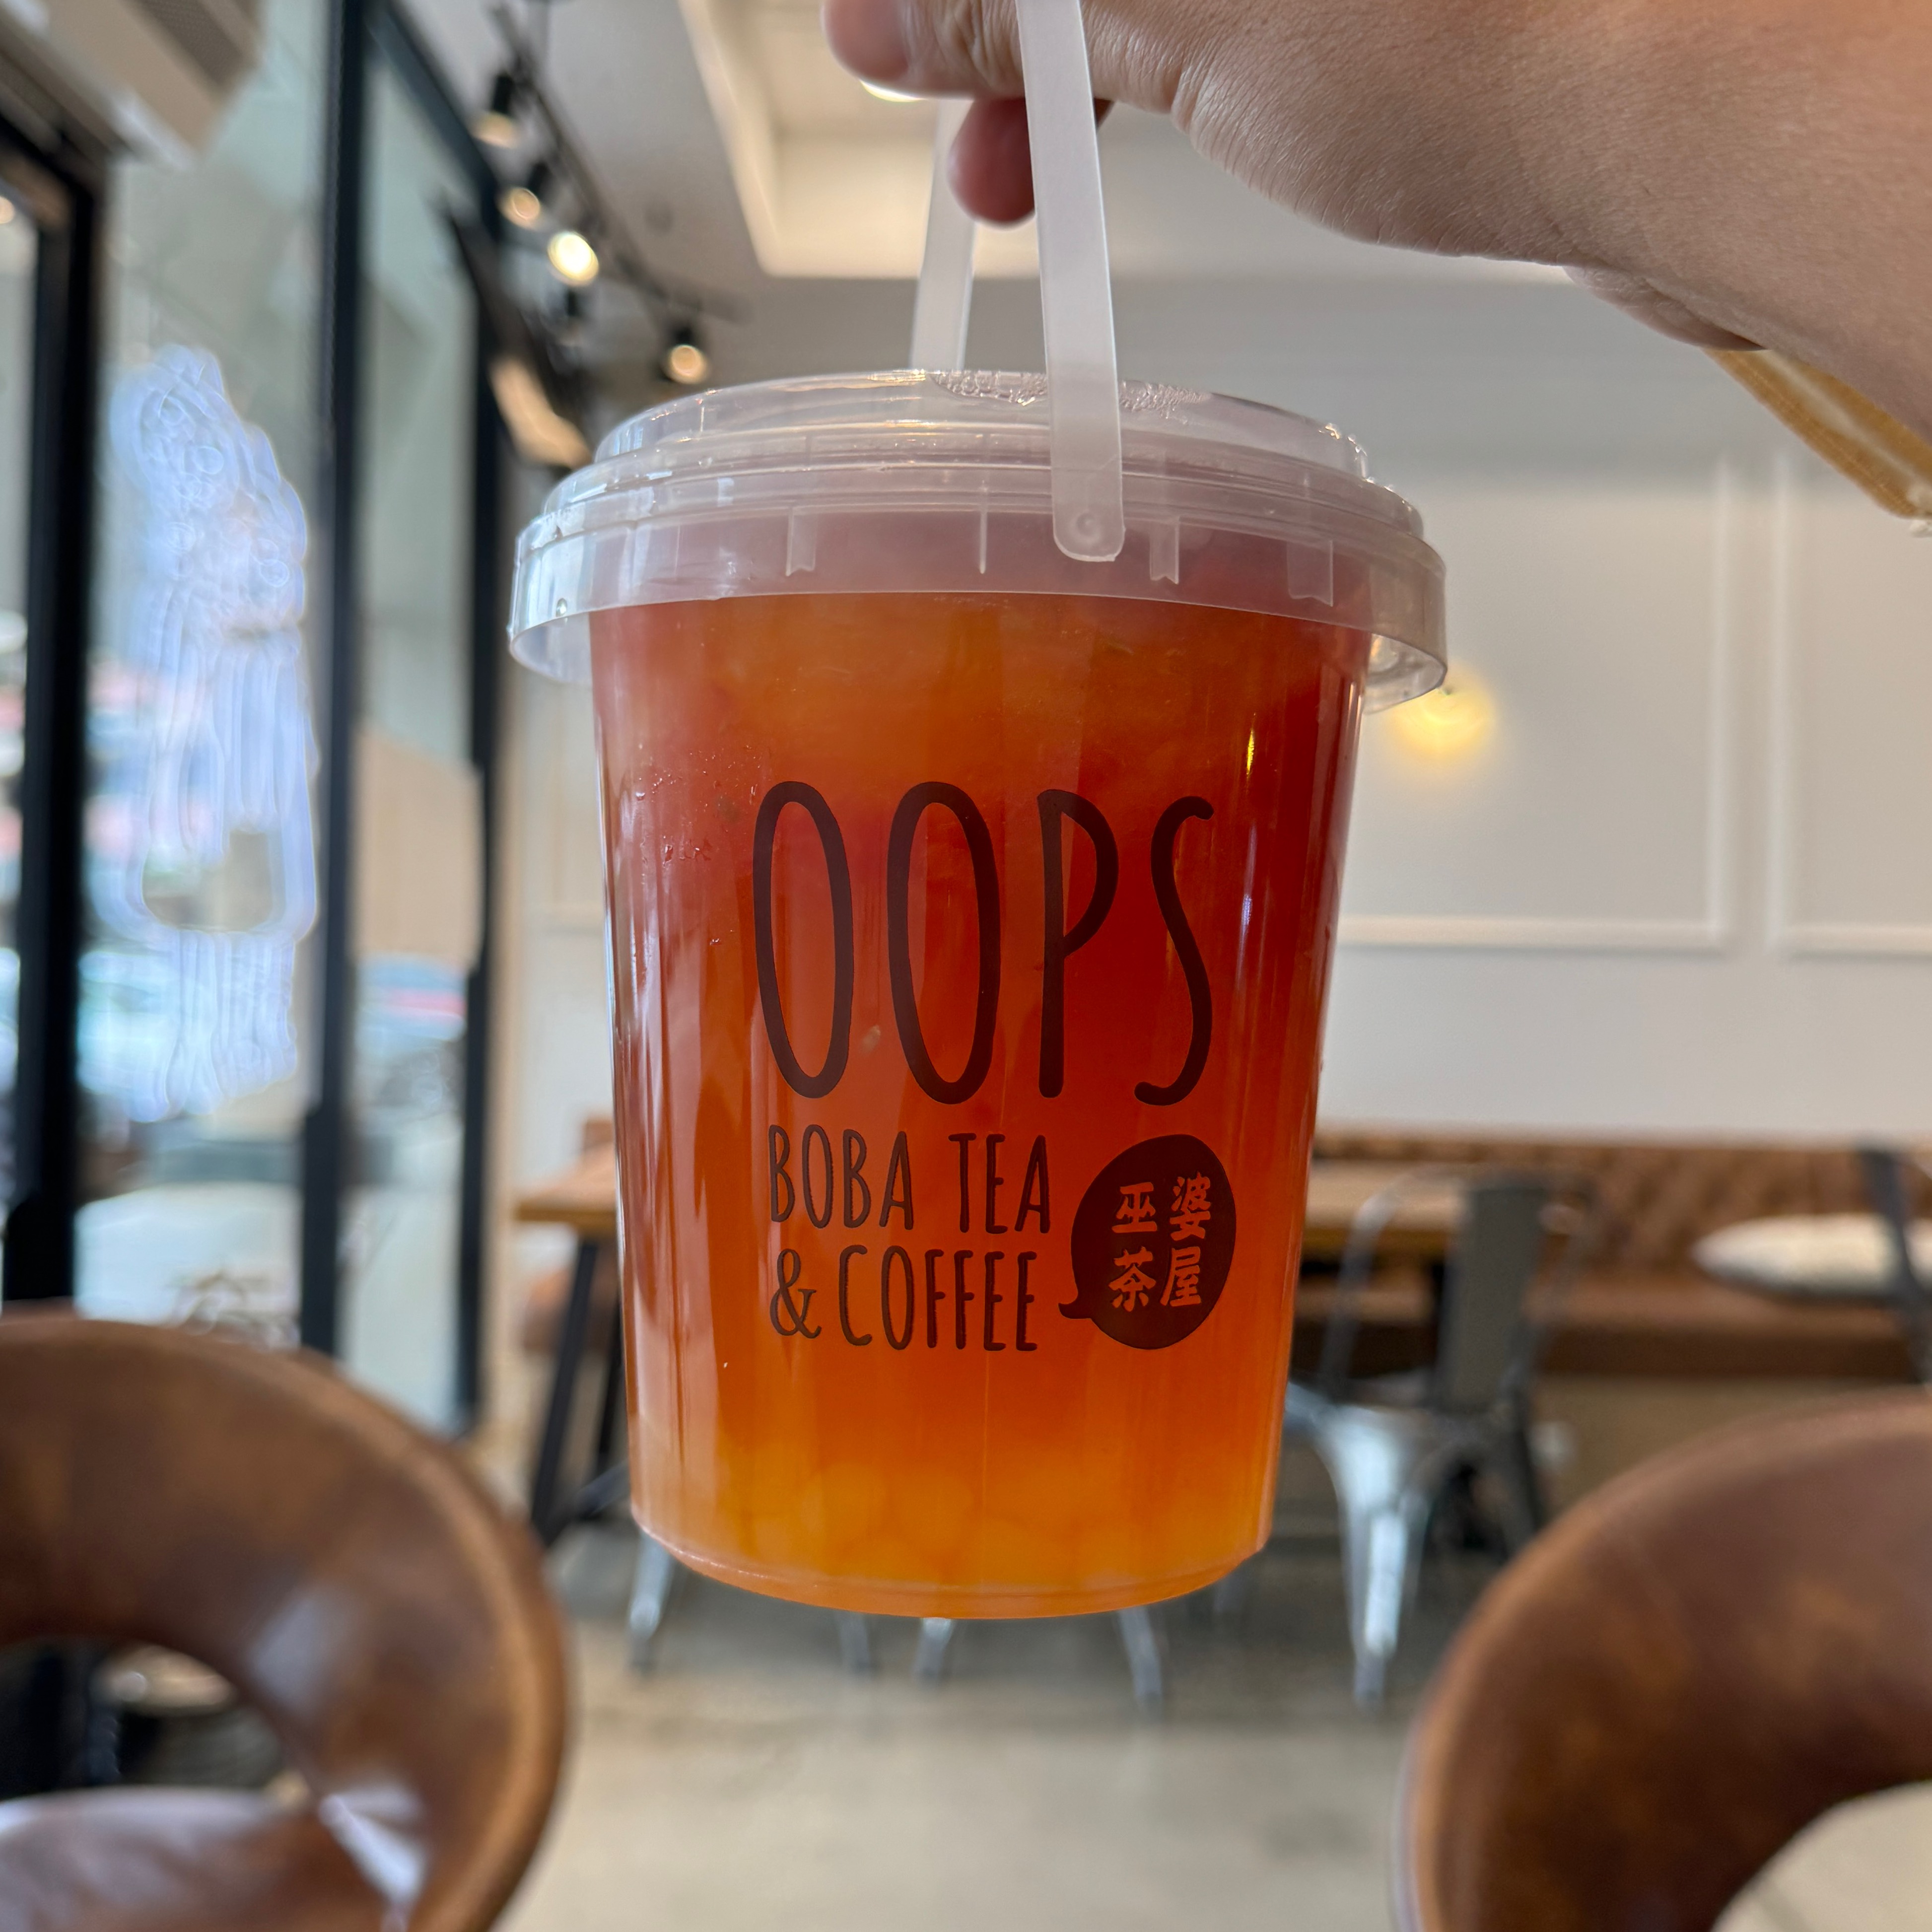 Watermelon Peach Tea $7.30 L from Oops Boba on #foodmento http://foodmento.com/dish/57756